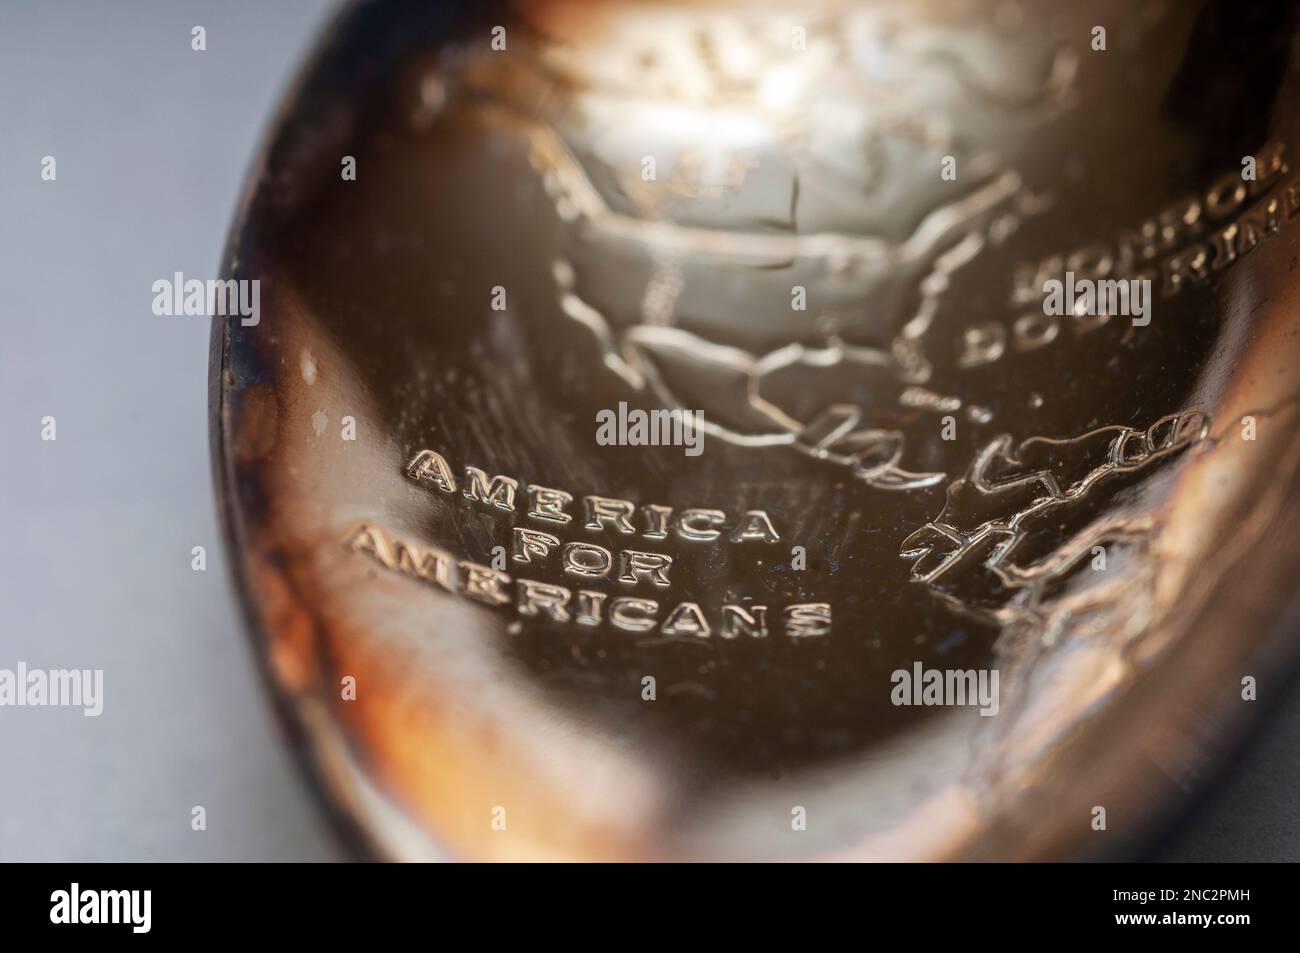 Tarnished Wm Rogers silver plate Americana spoon commemorating the Monroe Doctrine with the inscription “America For Americans”, on Monday, February 6, 2023. (© Richard B. Levine) Stock Photo